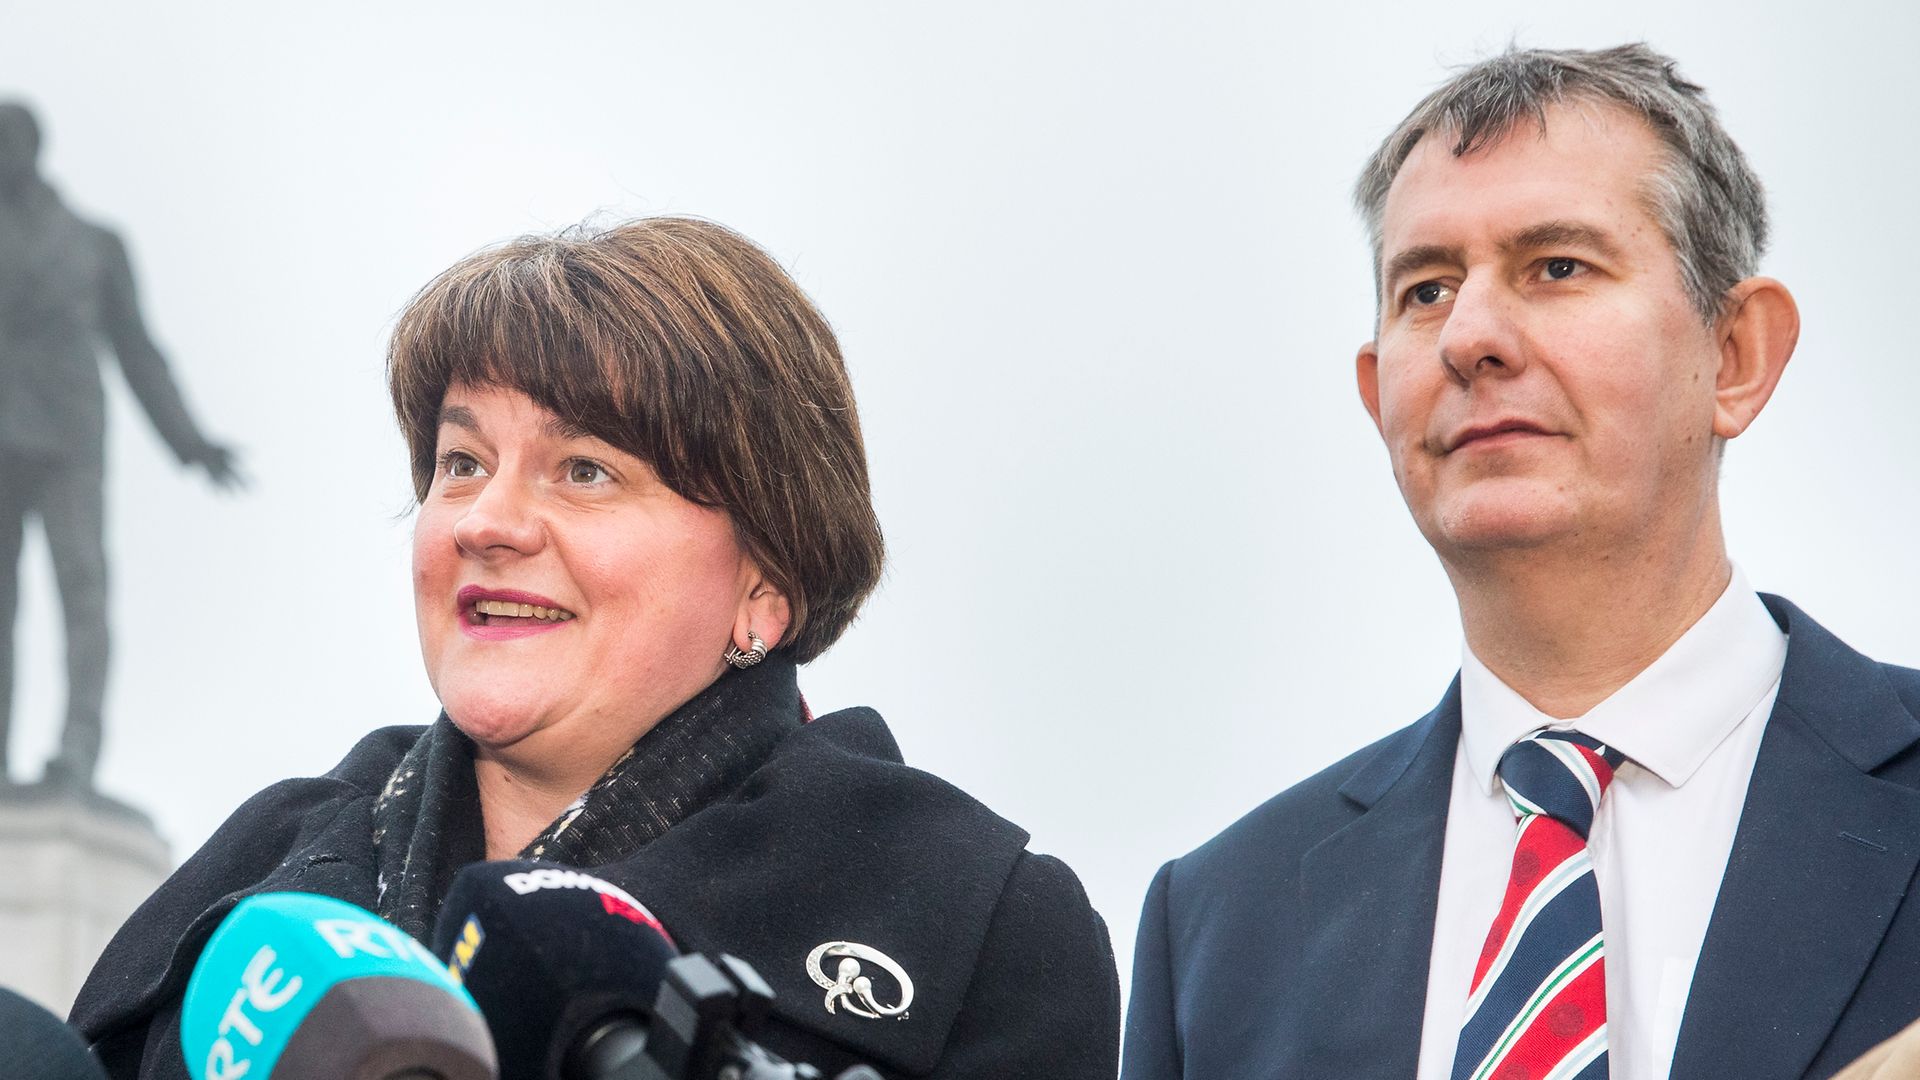 DUP outgoing leader Arlene Foster and incoming leader Edwin Poots - Credit: PA